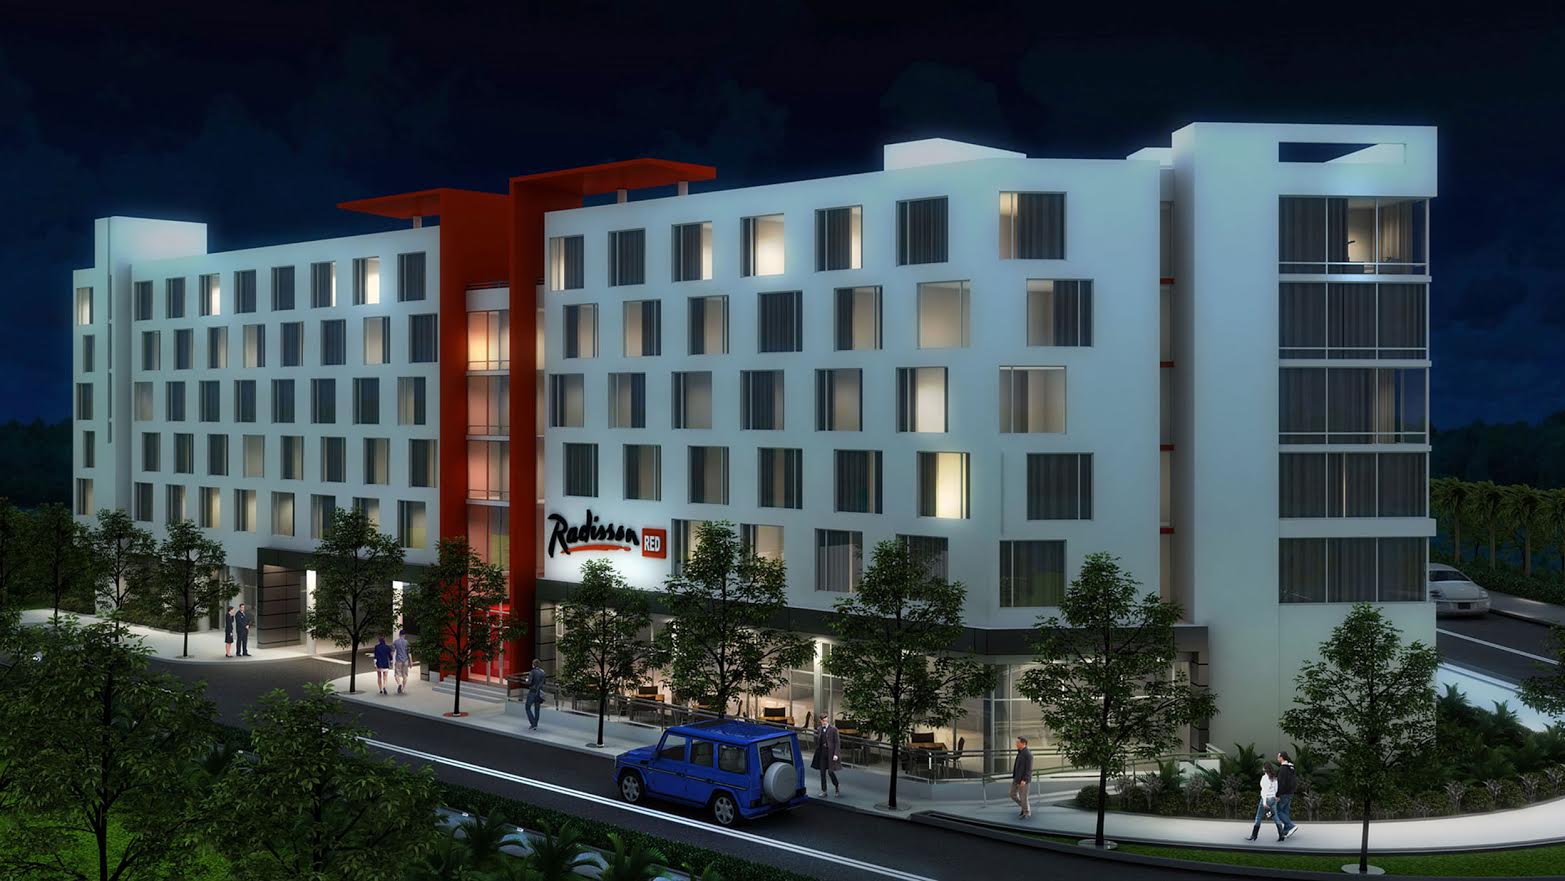 Rendering of the Radisson Red